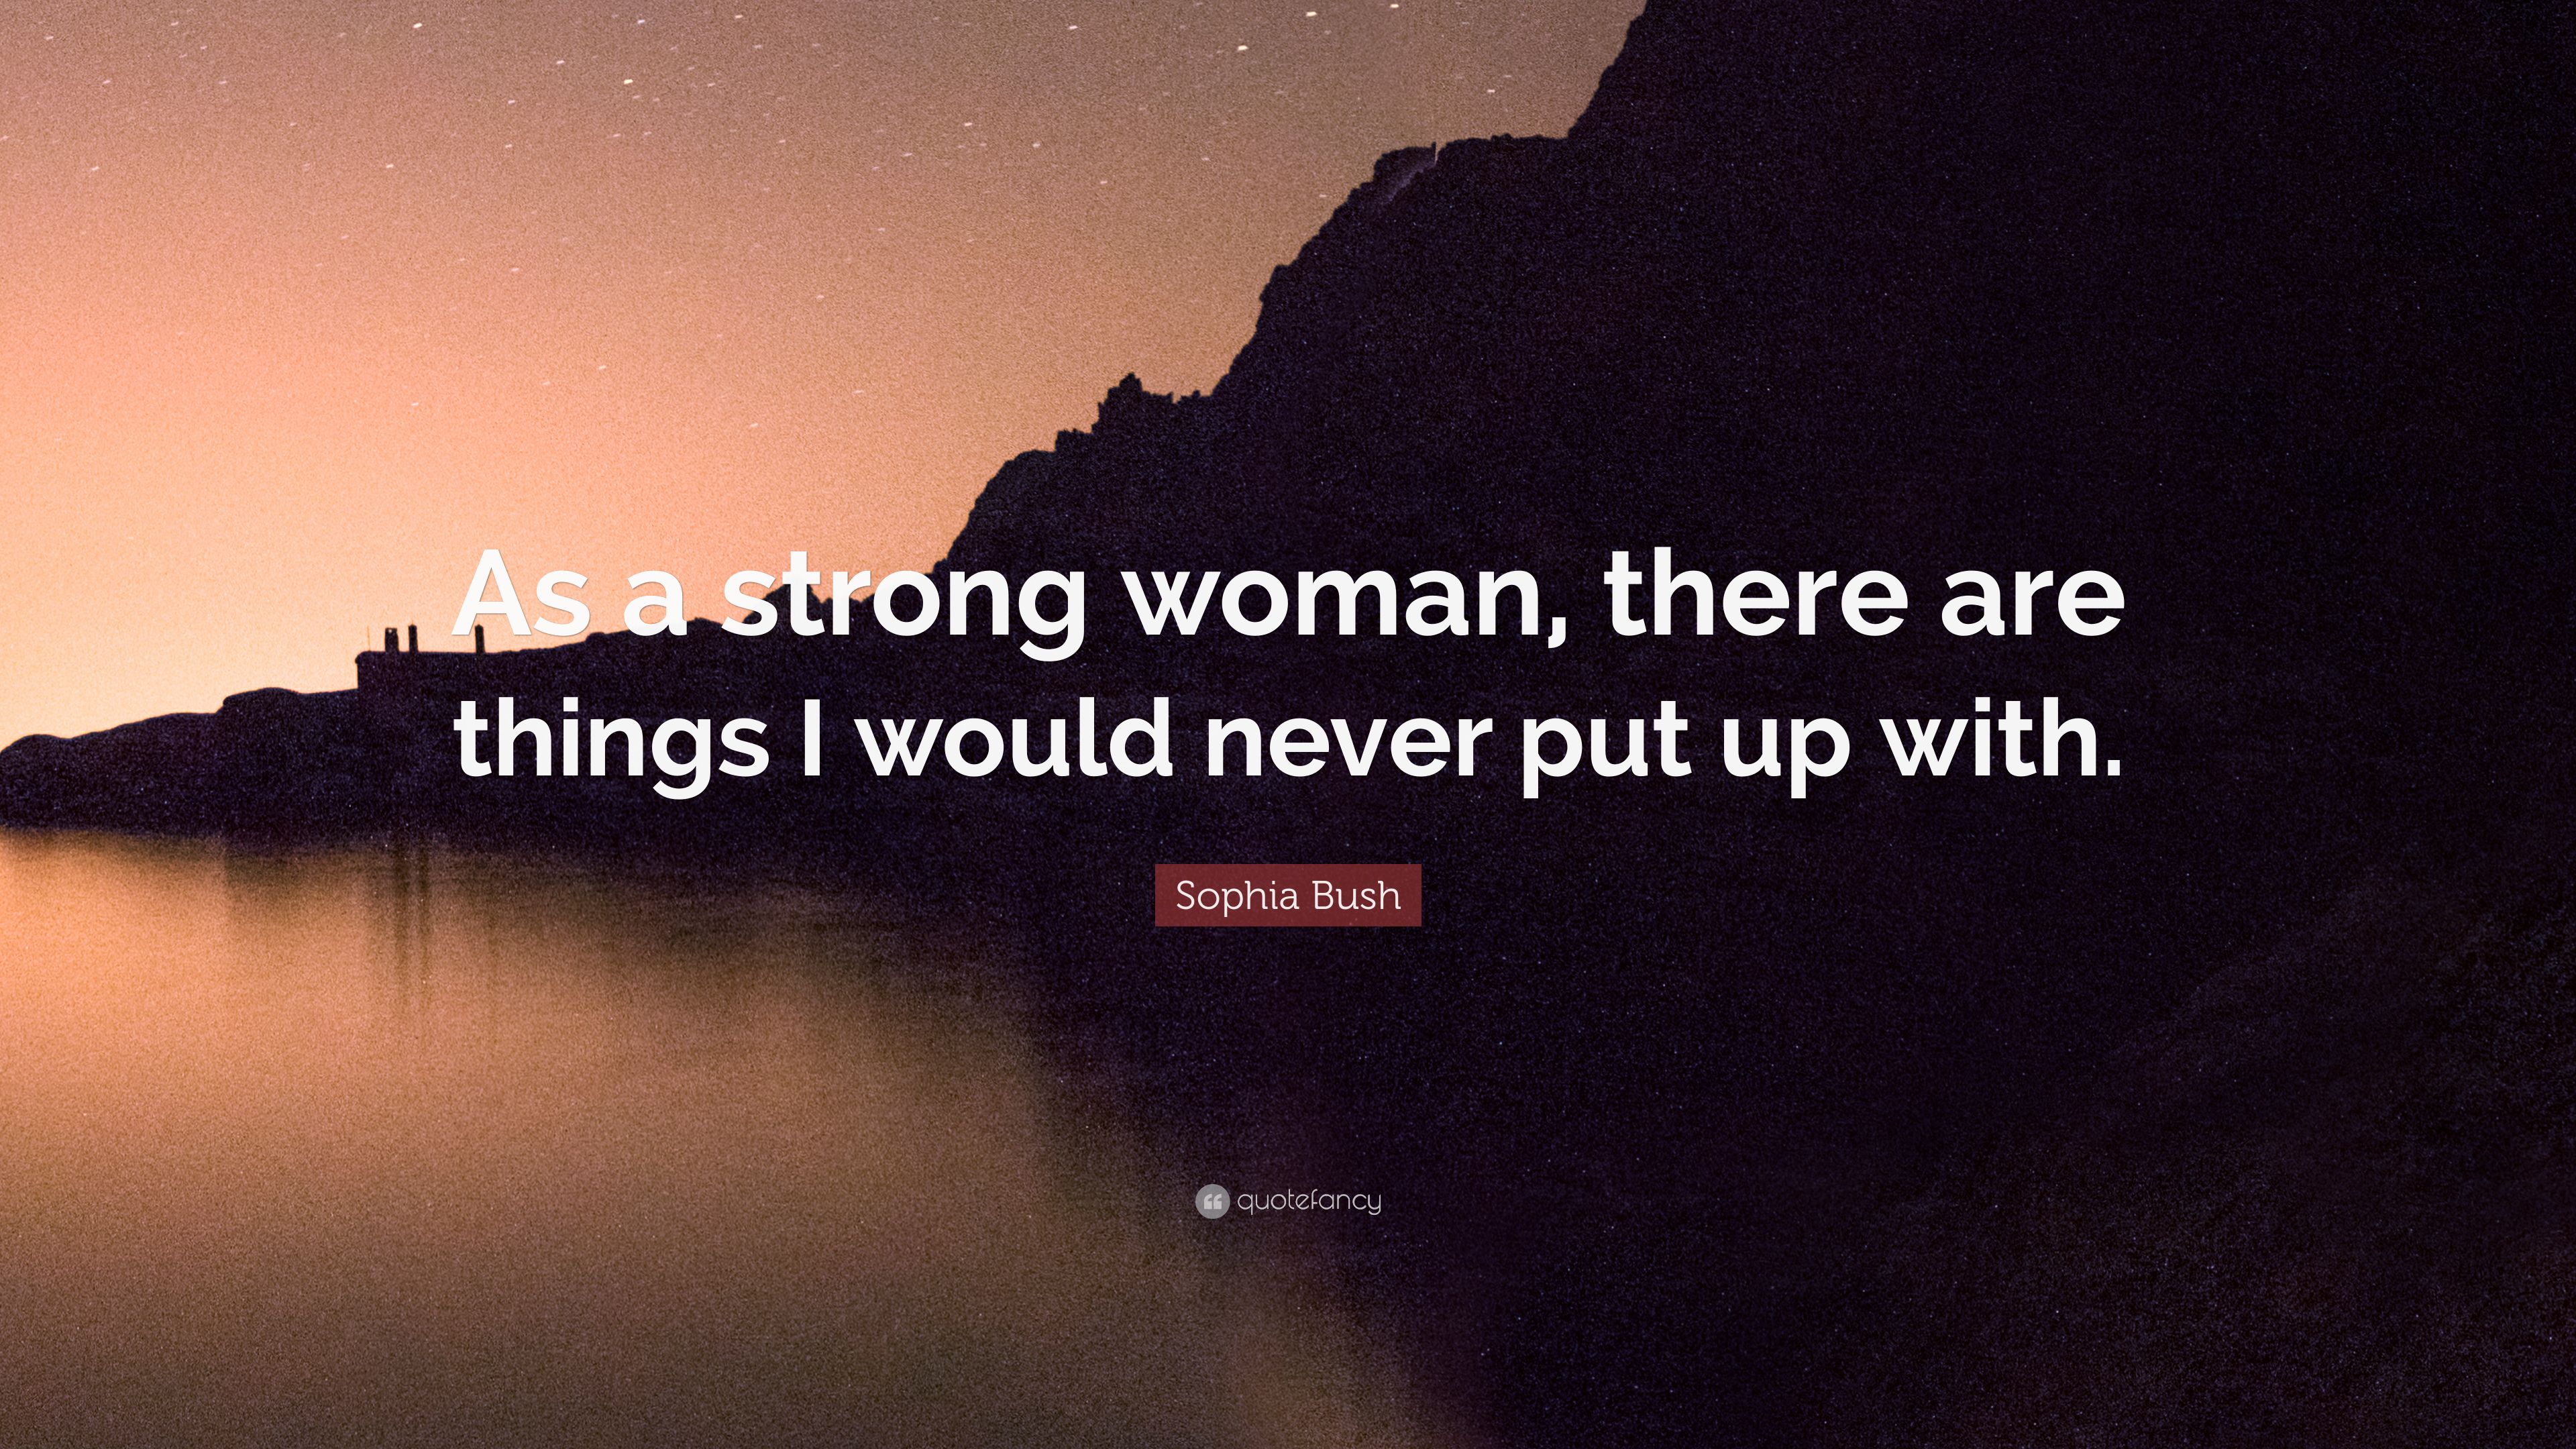 Sophia Bush Quote: “As a strong woman, there are things I would